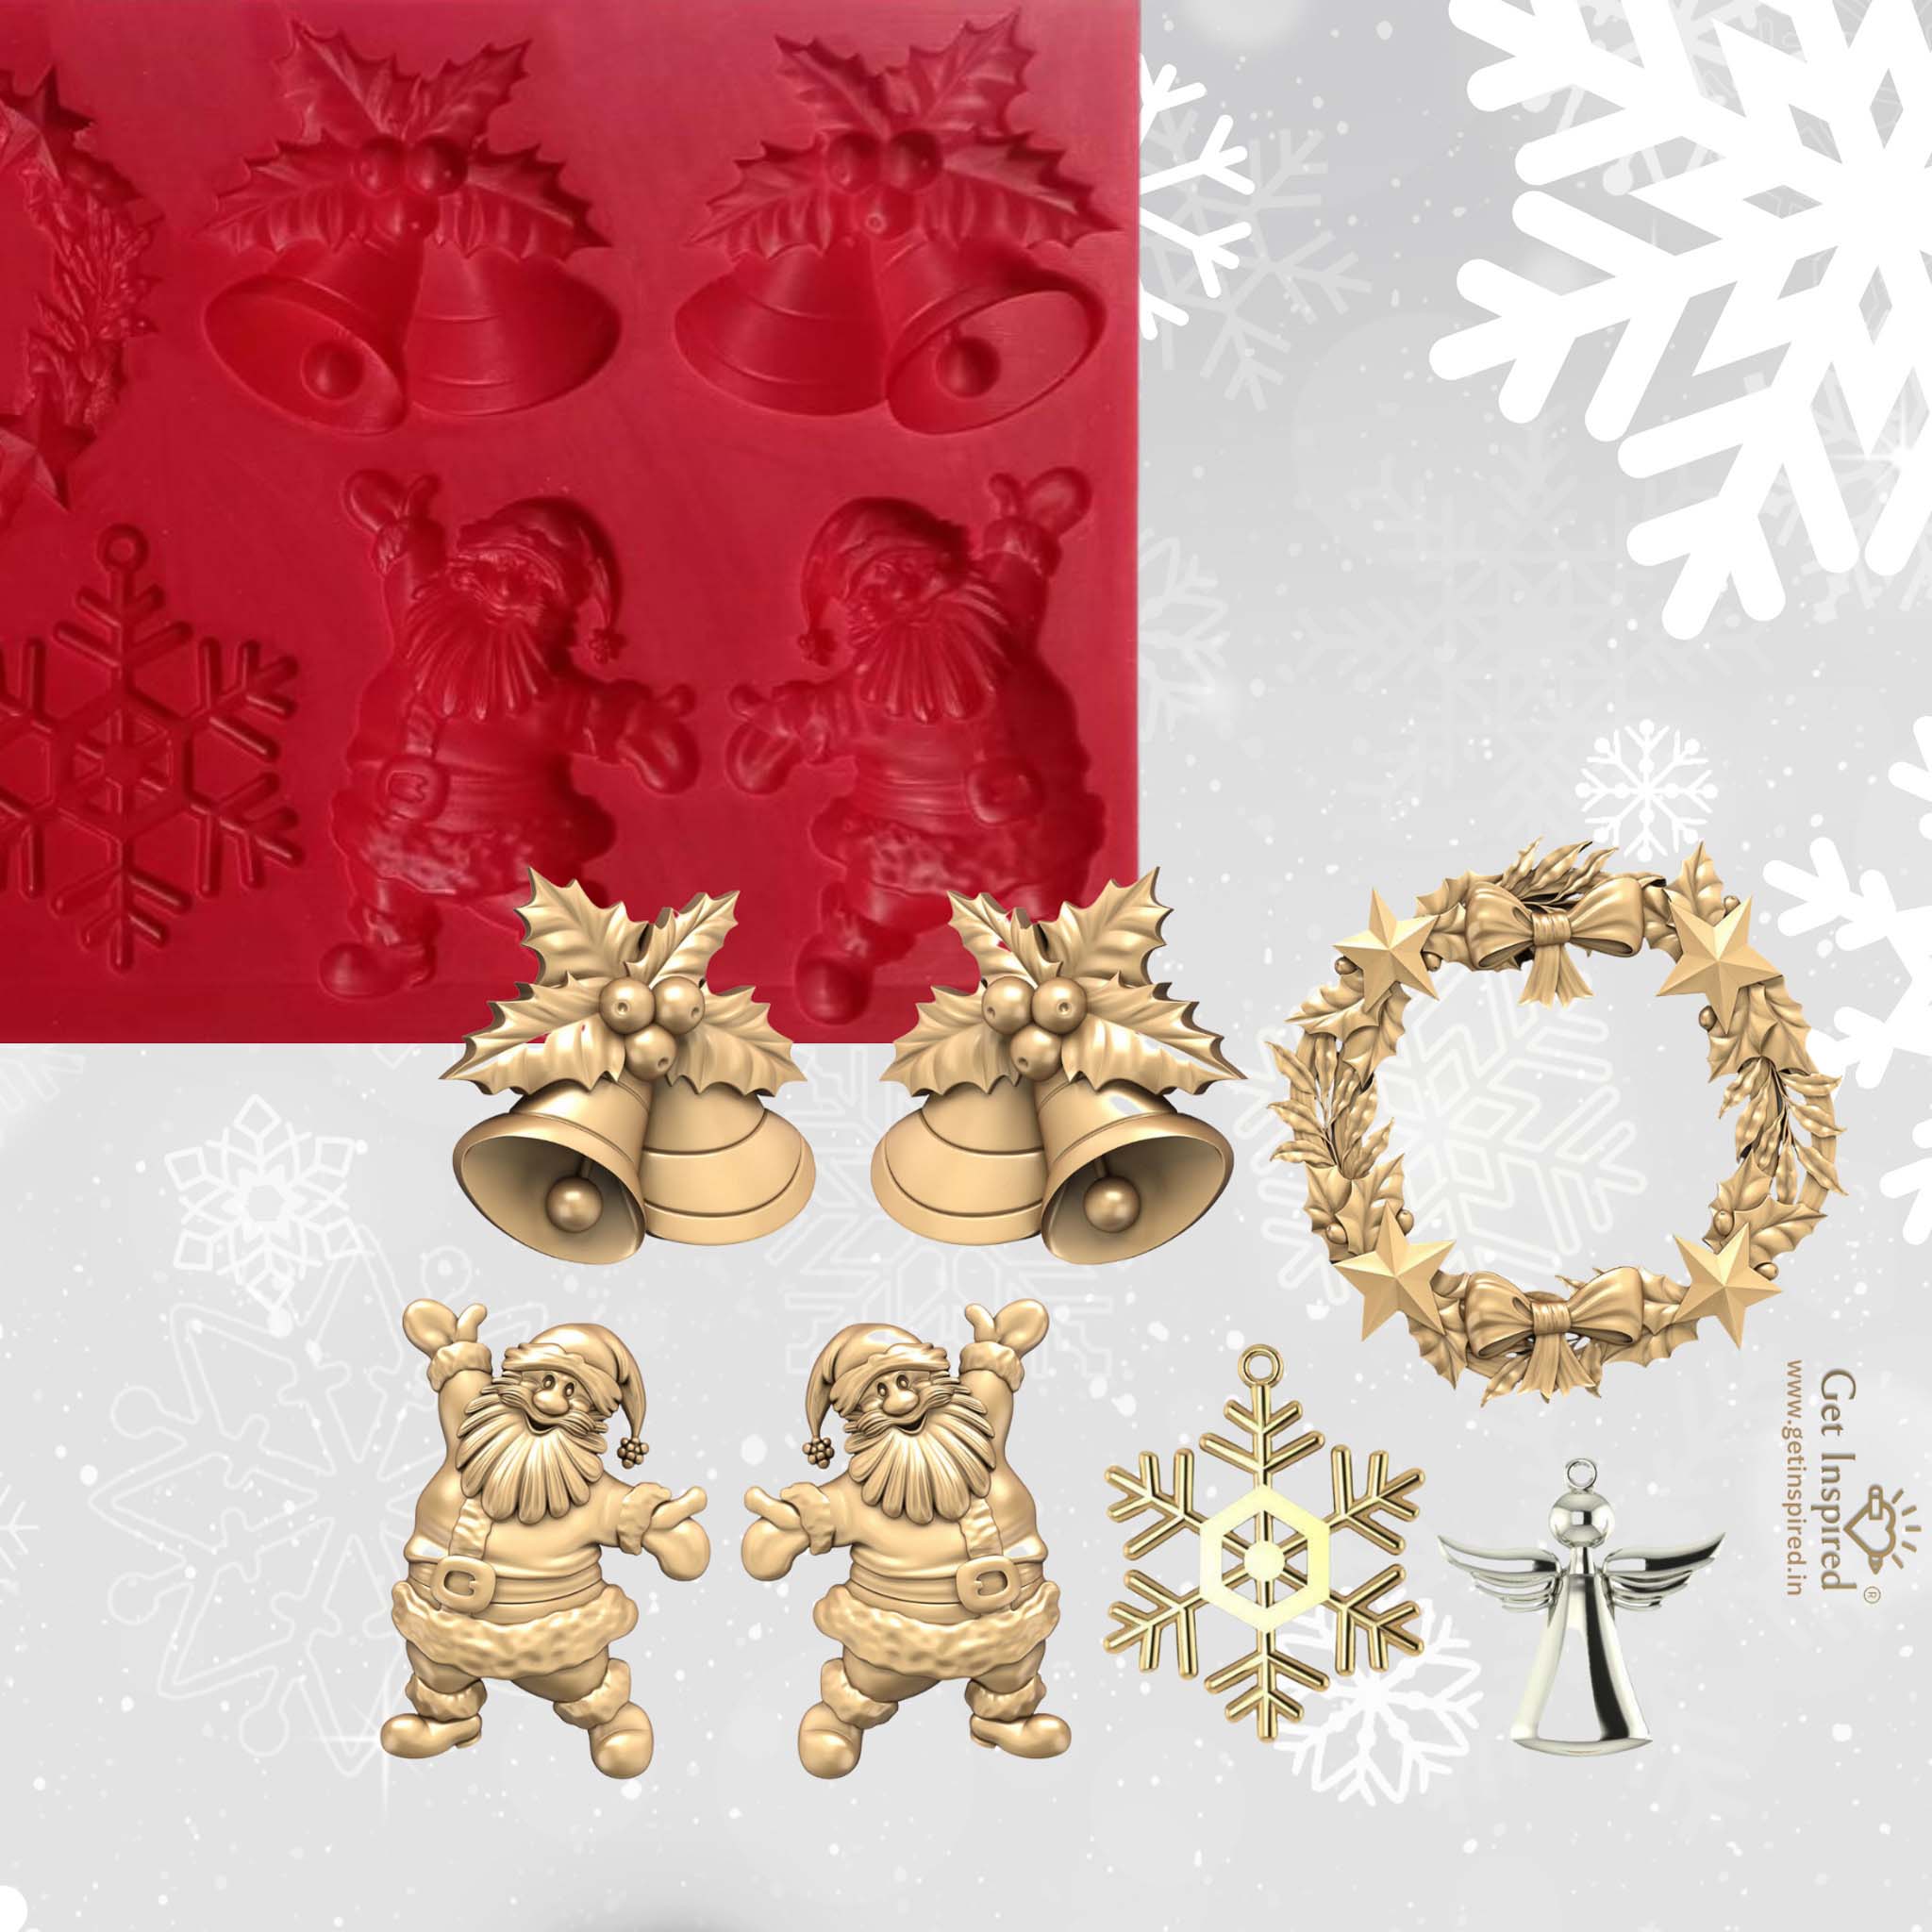 A red silicone mould and gold and silver colored castings of Get Inspired by Dadarkar Art's Christmas Charm are against a light grey with white snowflakes background.